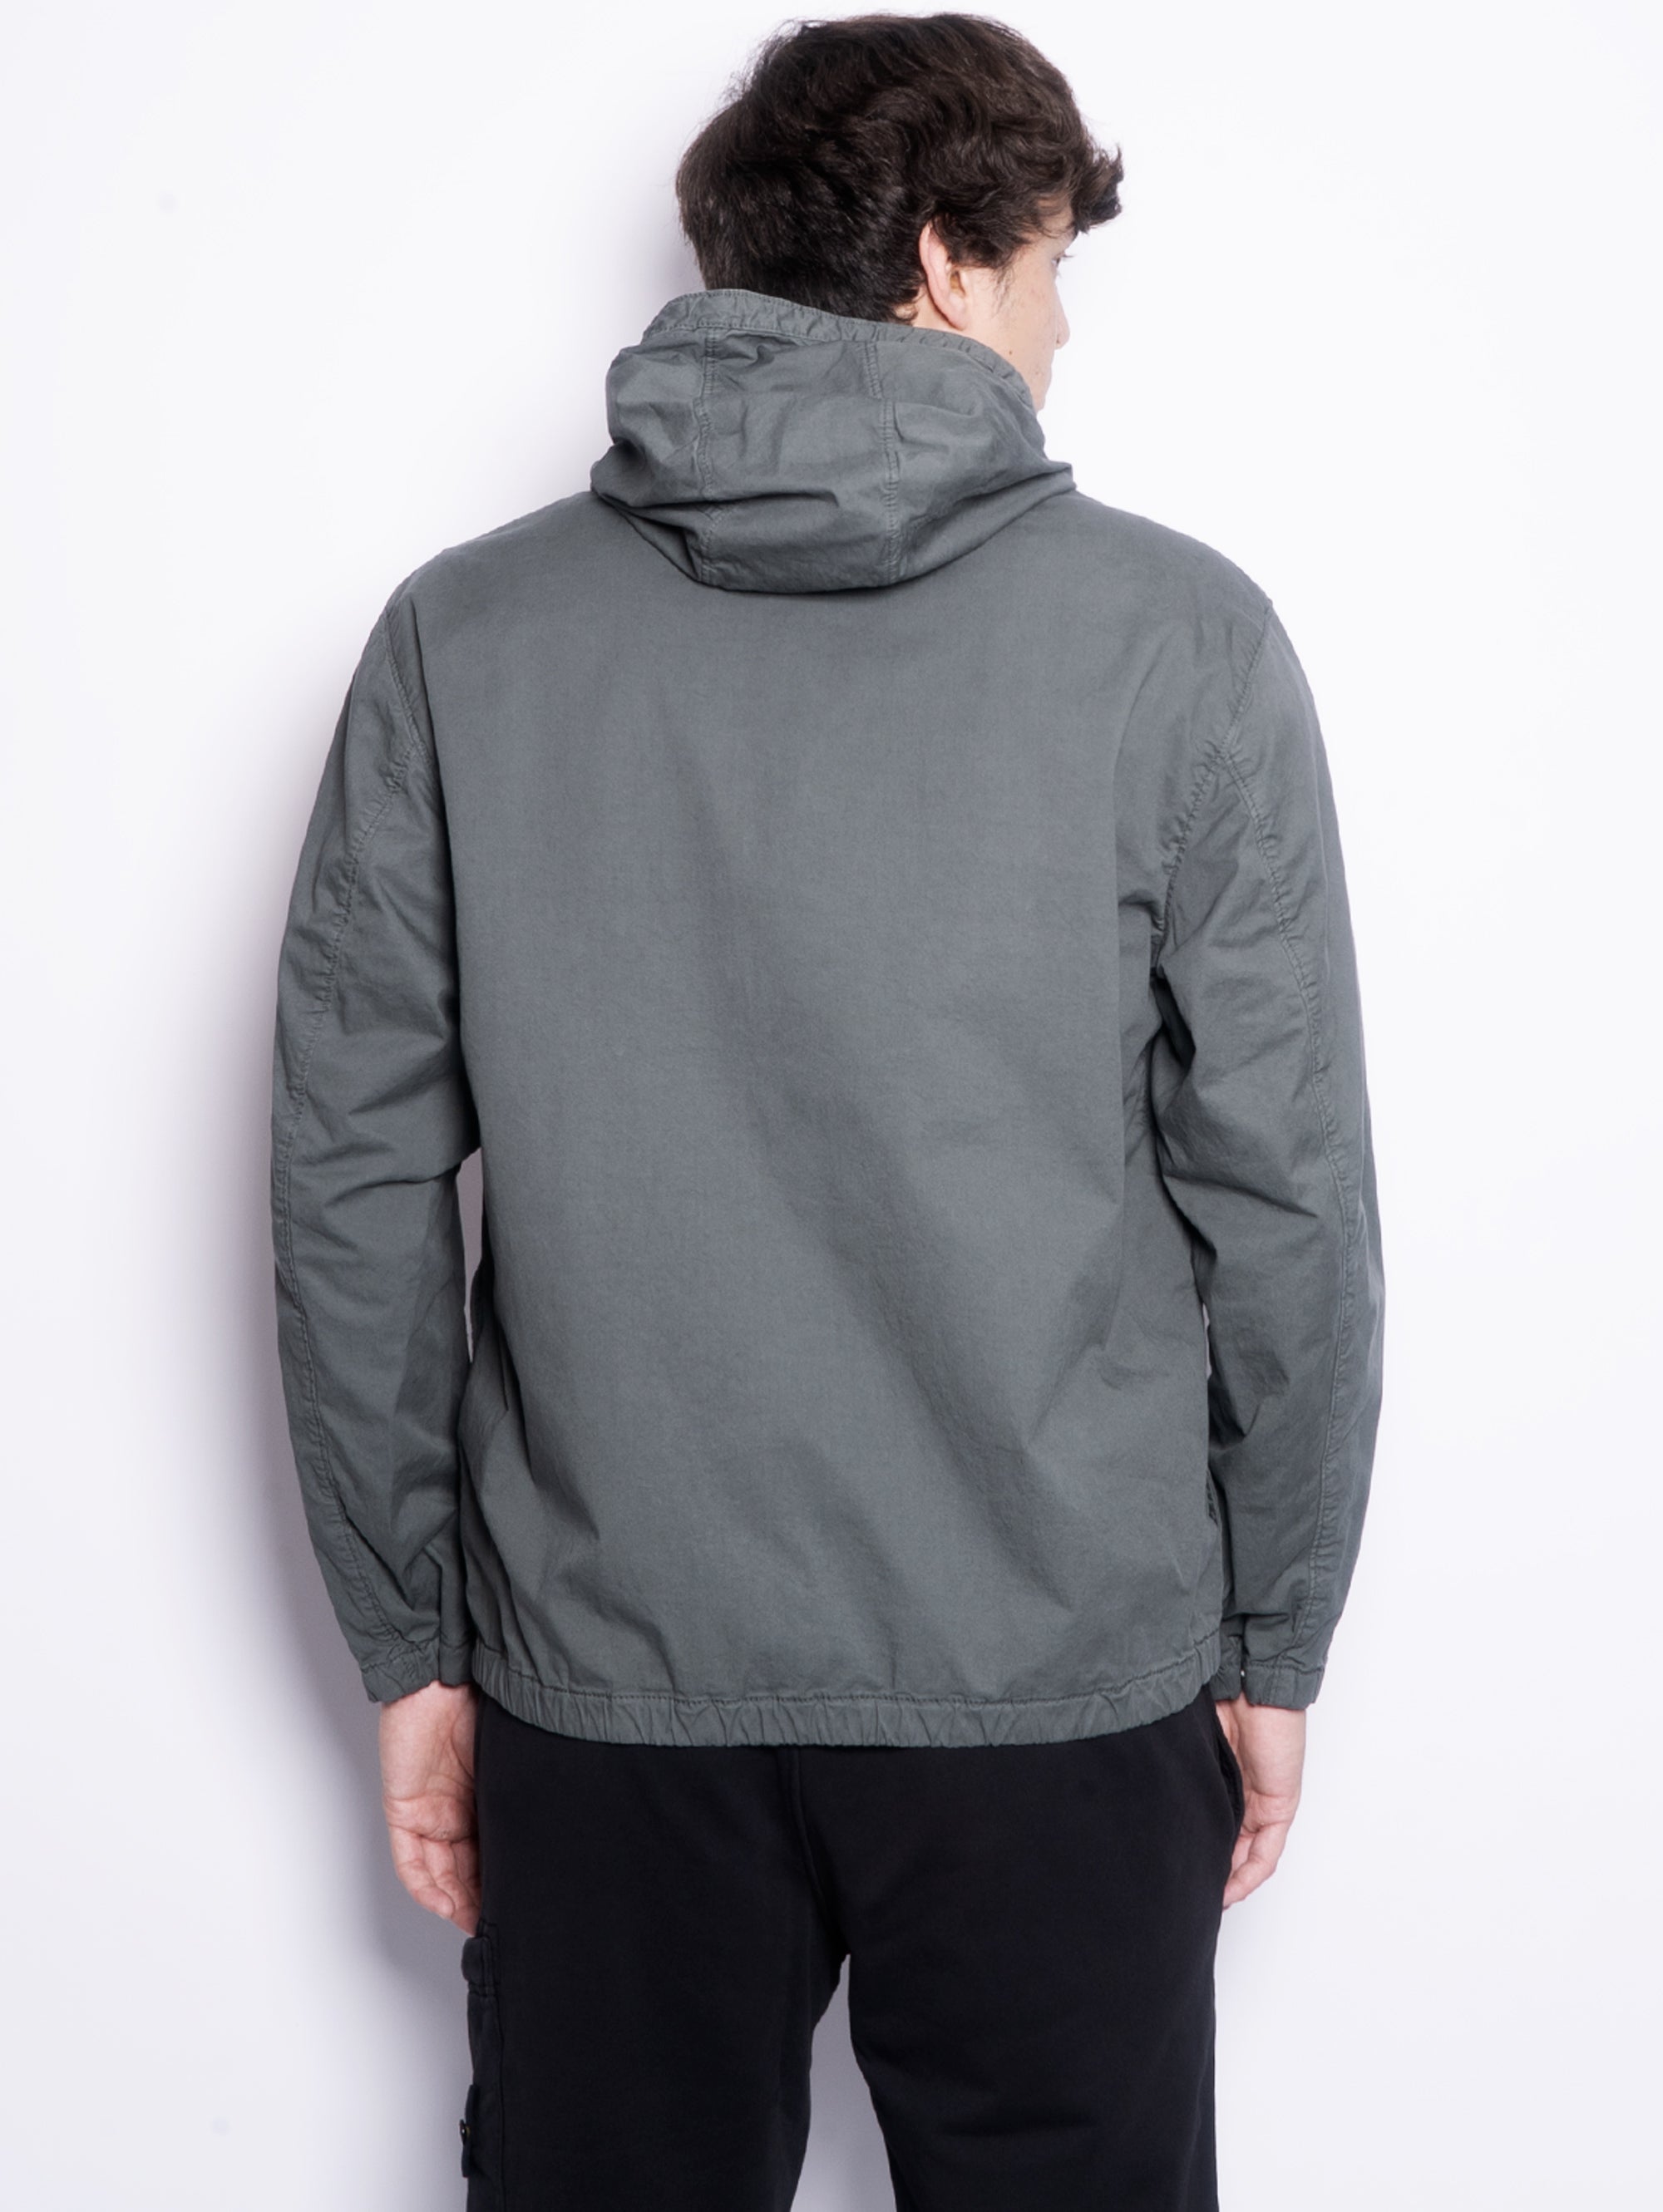 Jacket in Moss Garment Dyed Supima Cotton Twill